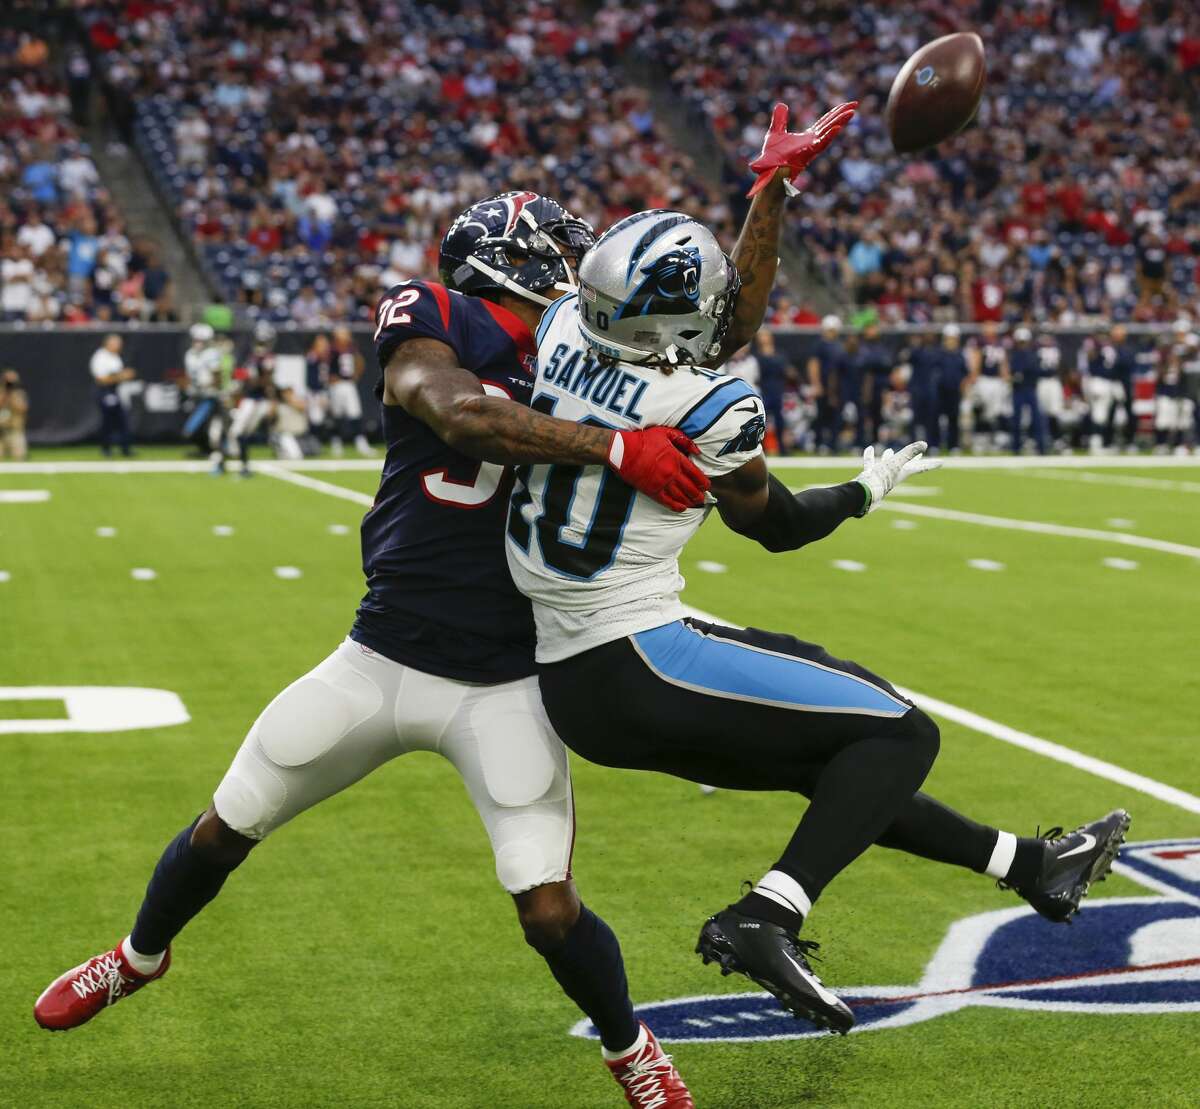 Houston Texans cornerback Lonnie Johnson (32) gets tangled up with Carolina Panthers wide receiver Curtis Samuel (10) and is called for pass interference during an NFL football game at NRG Stadium on Sunday, Sept. 29, 2019, in Houston.